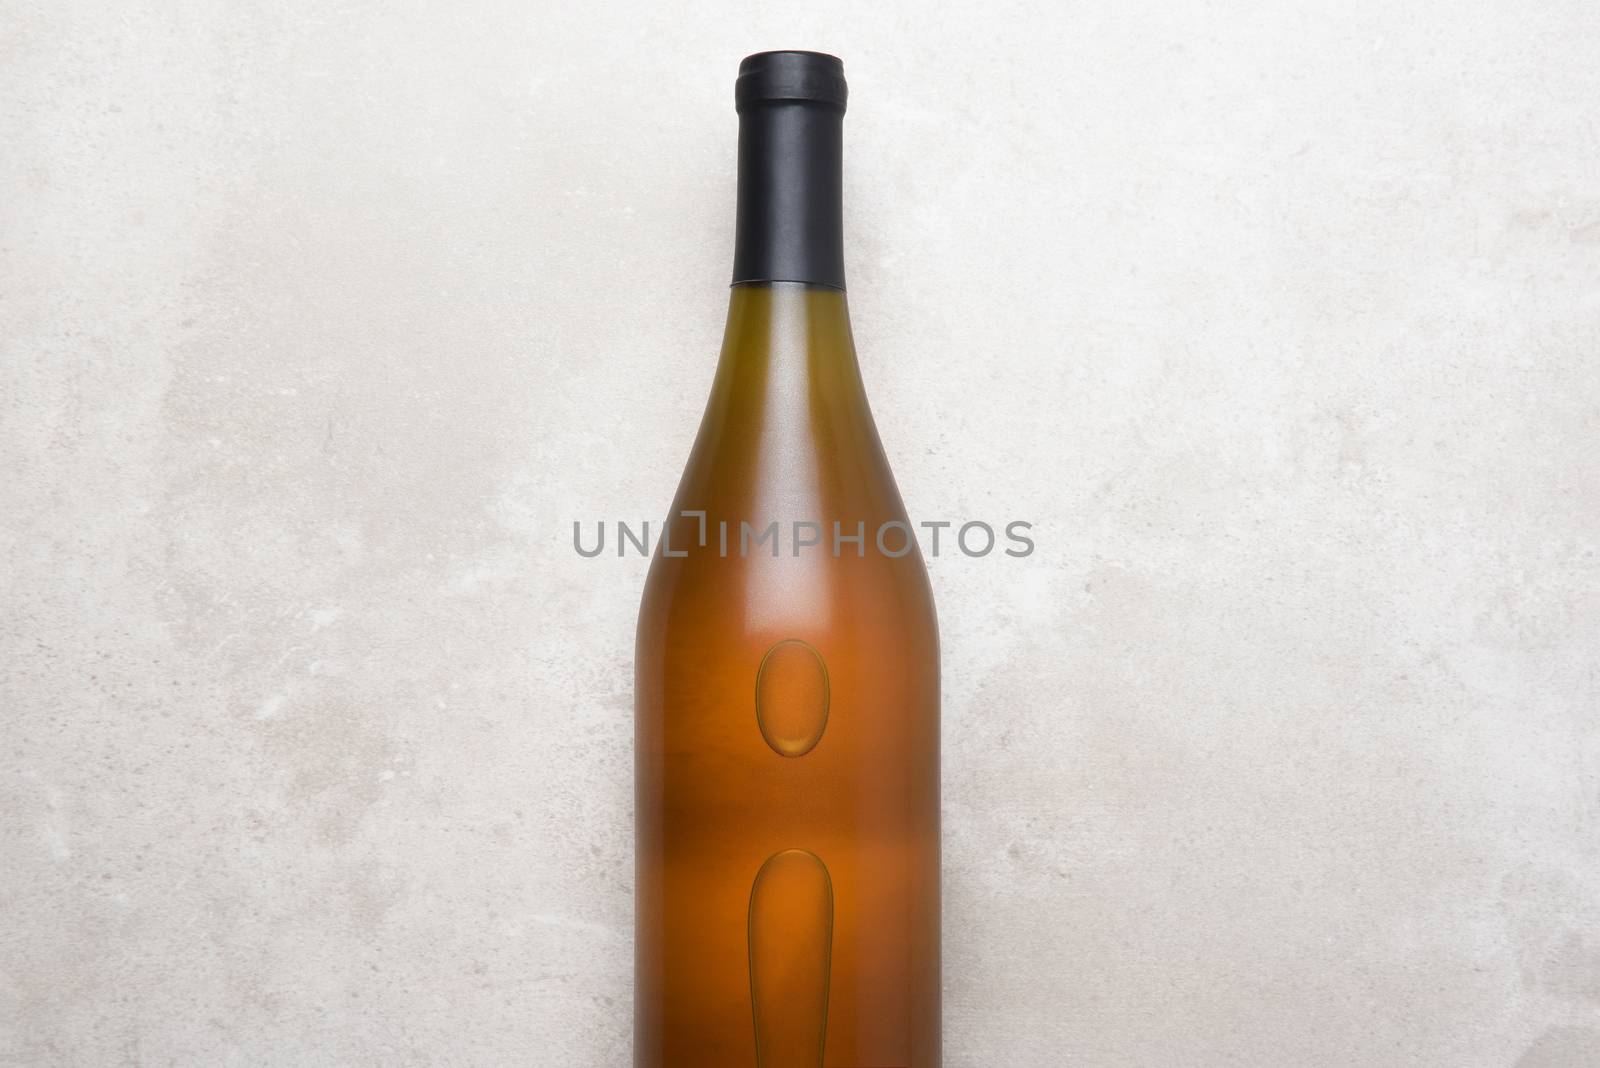 Chardonnay Wine: Top view of a single bottle on a concrete counter top. Bottle is in the middle with copy space on both sides.